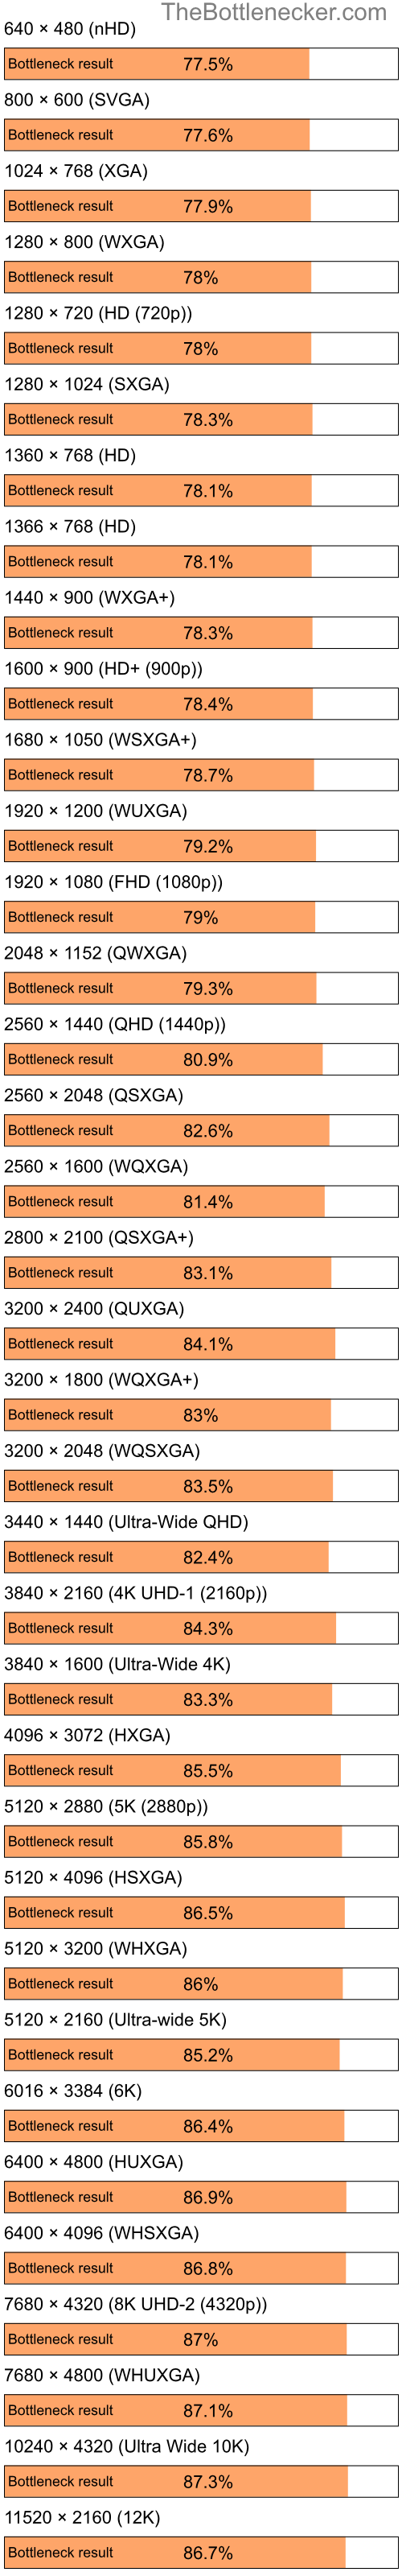 Bottleneck results by resolution for Intel Atom Z520 and AMD Mobility Radeon X300 in7 Days to Die